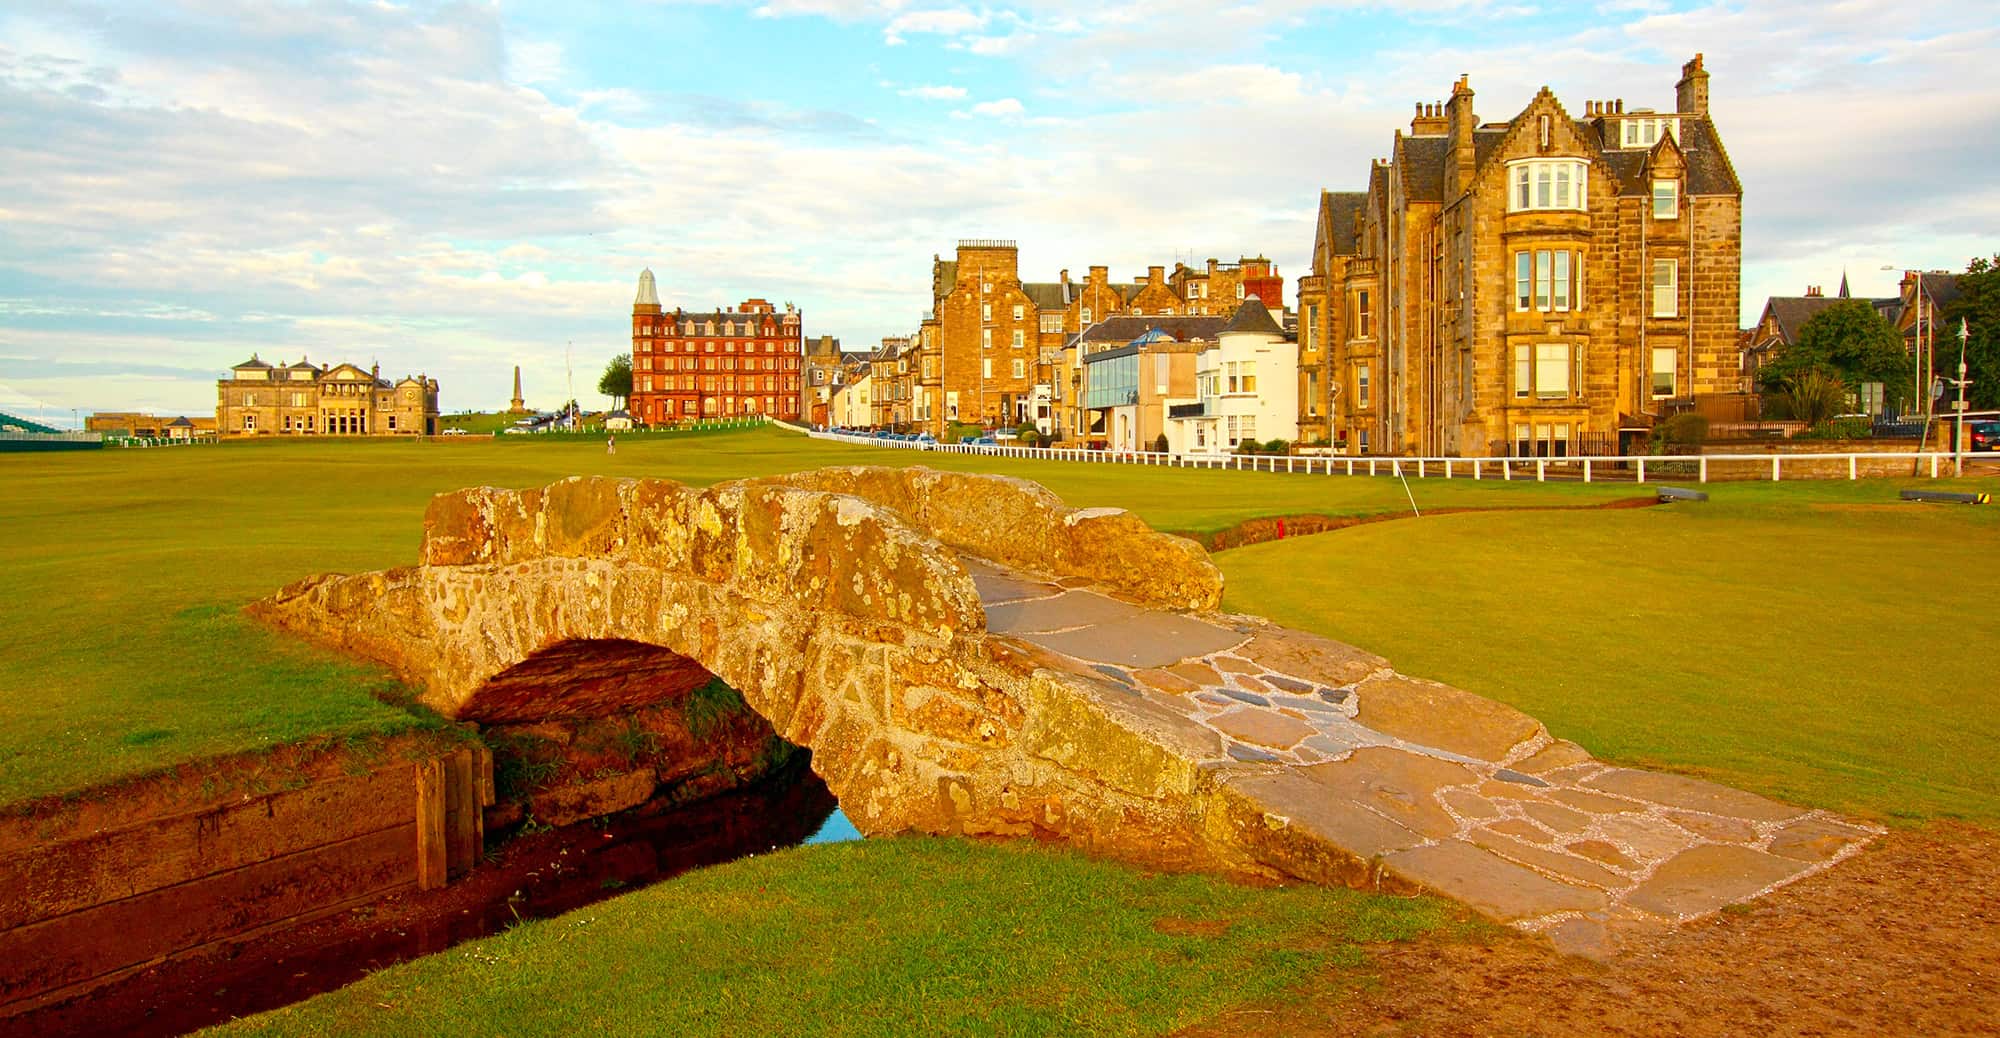 oldcourse